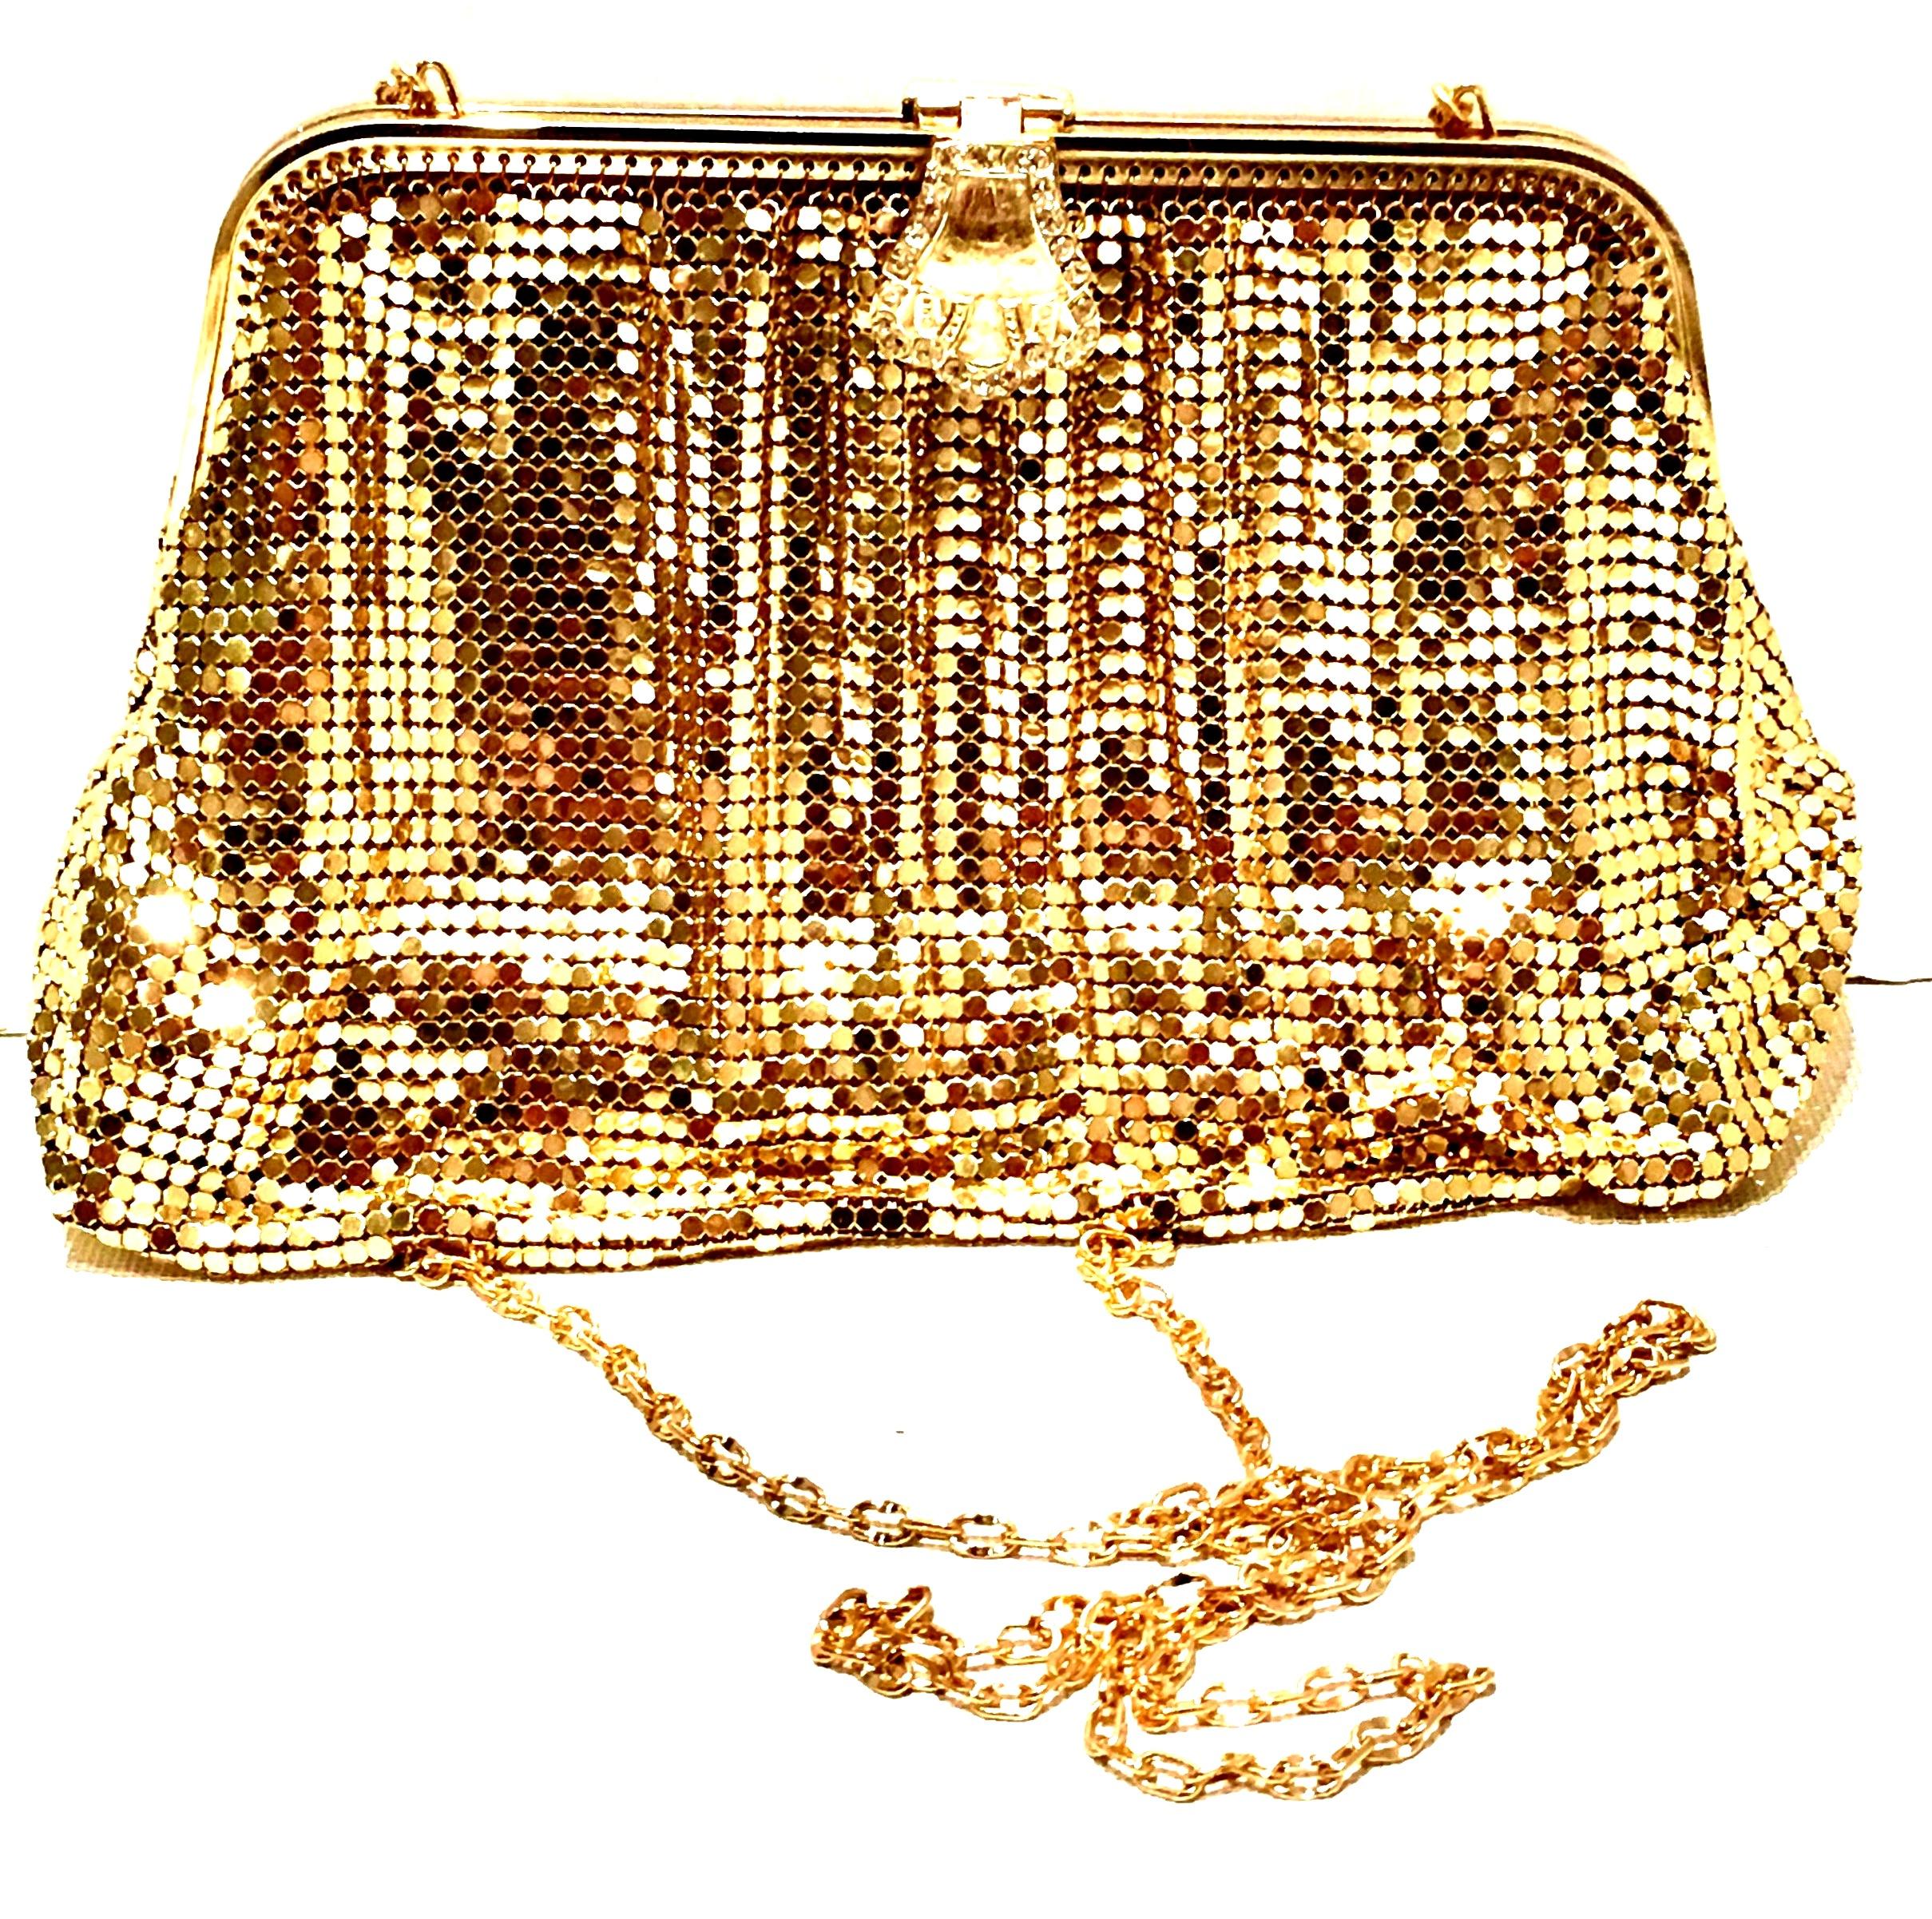 20th Century Gold metal mesh & Swarovski Crystal clutch style evening bag by, Whiting & Dab]vis. Features,  gold plate metal mesh and Swarovski crystal adorned snap closure, chain link shoulder strap that can be tucked in when not in use. Fully